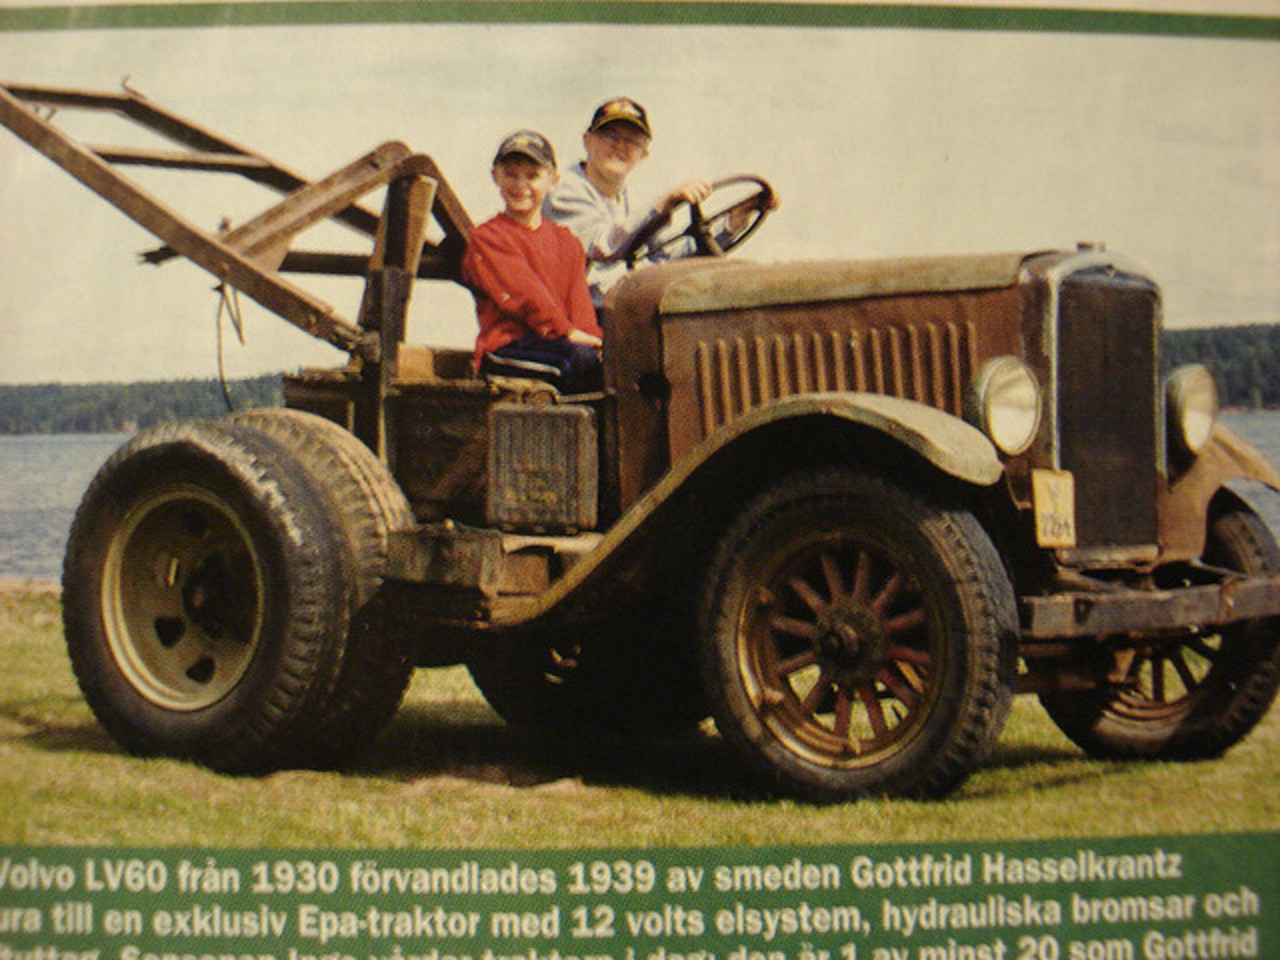 A Volvo LV60 from 1930 was transformed to a tractor 1939, by the blacksmith